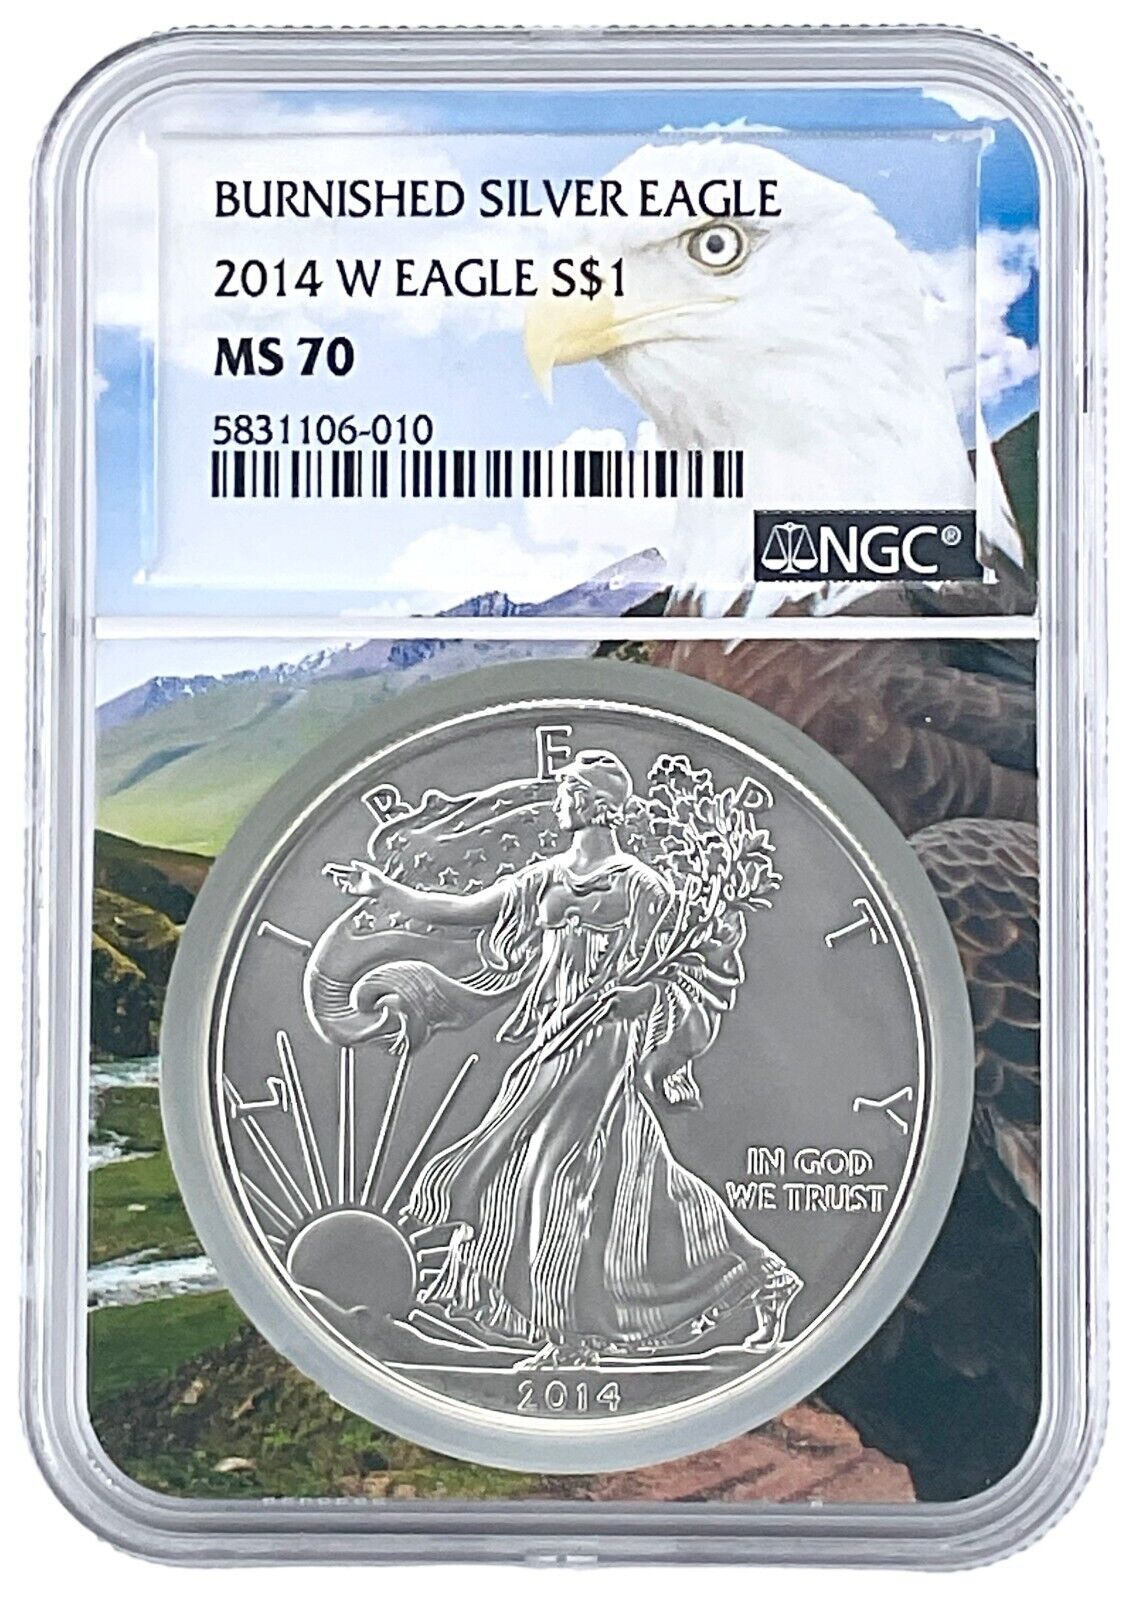 2014 W Burnished Silver Eagle NGC MS70 - Eagle Picture Core - POP 17